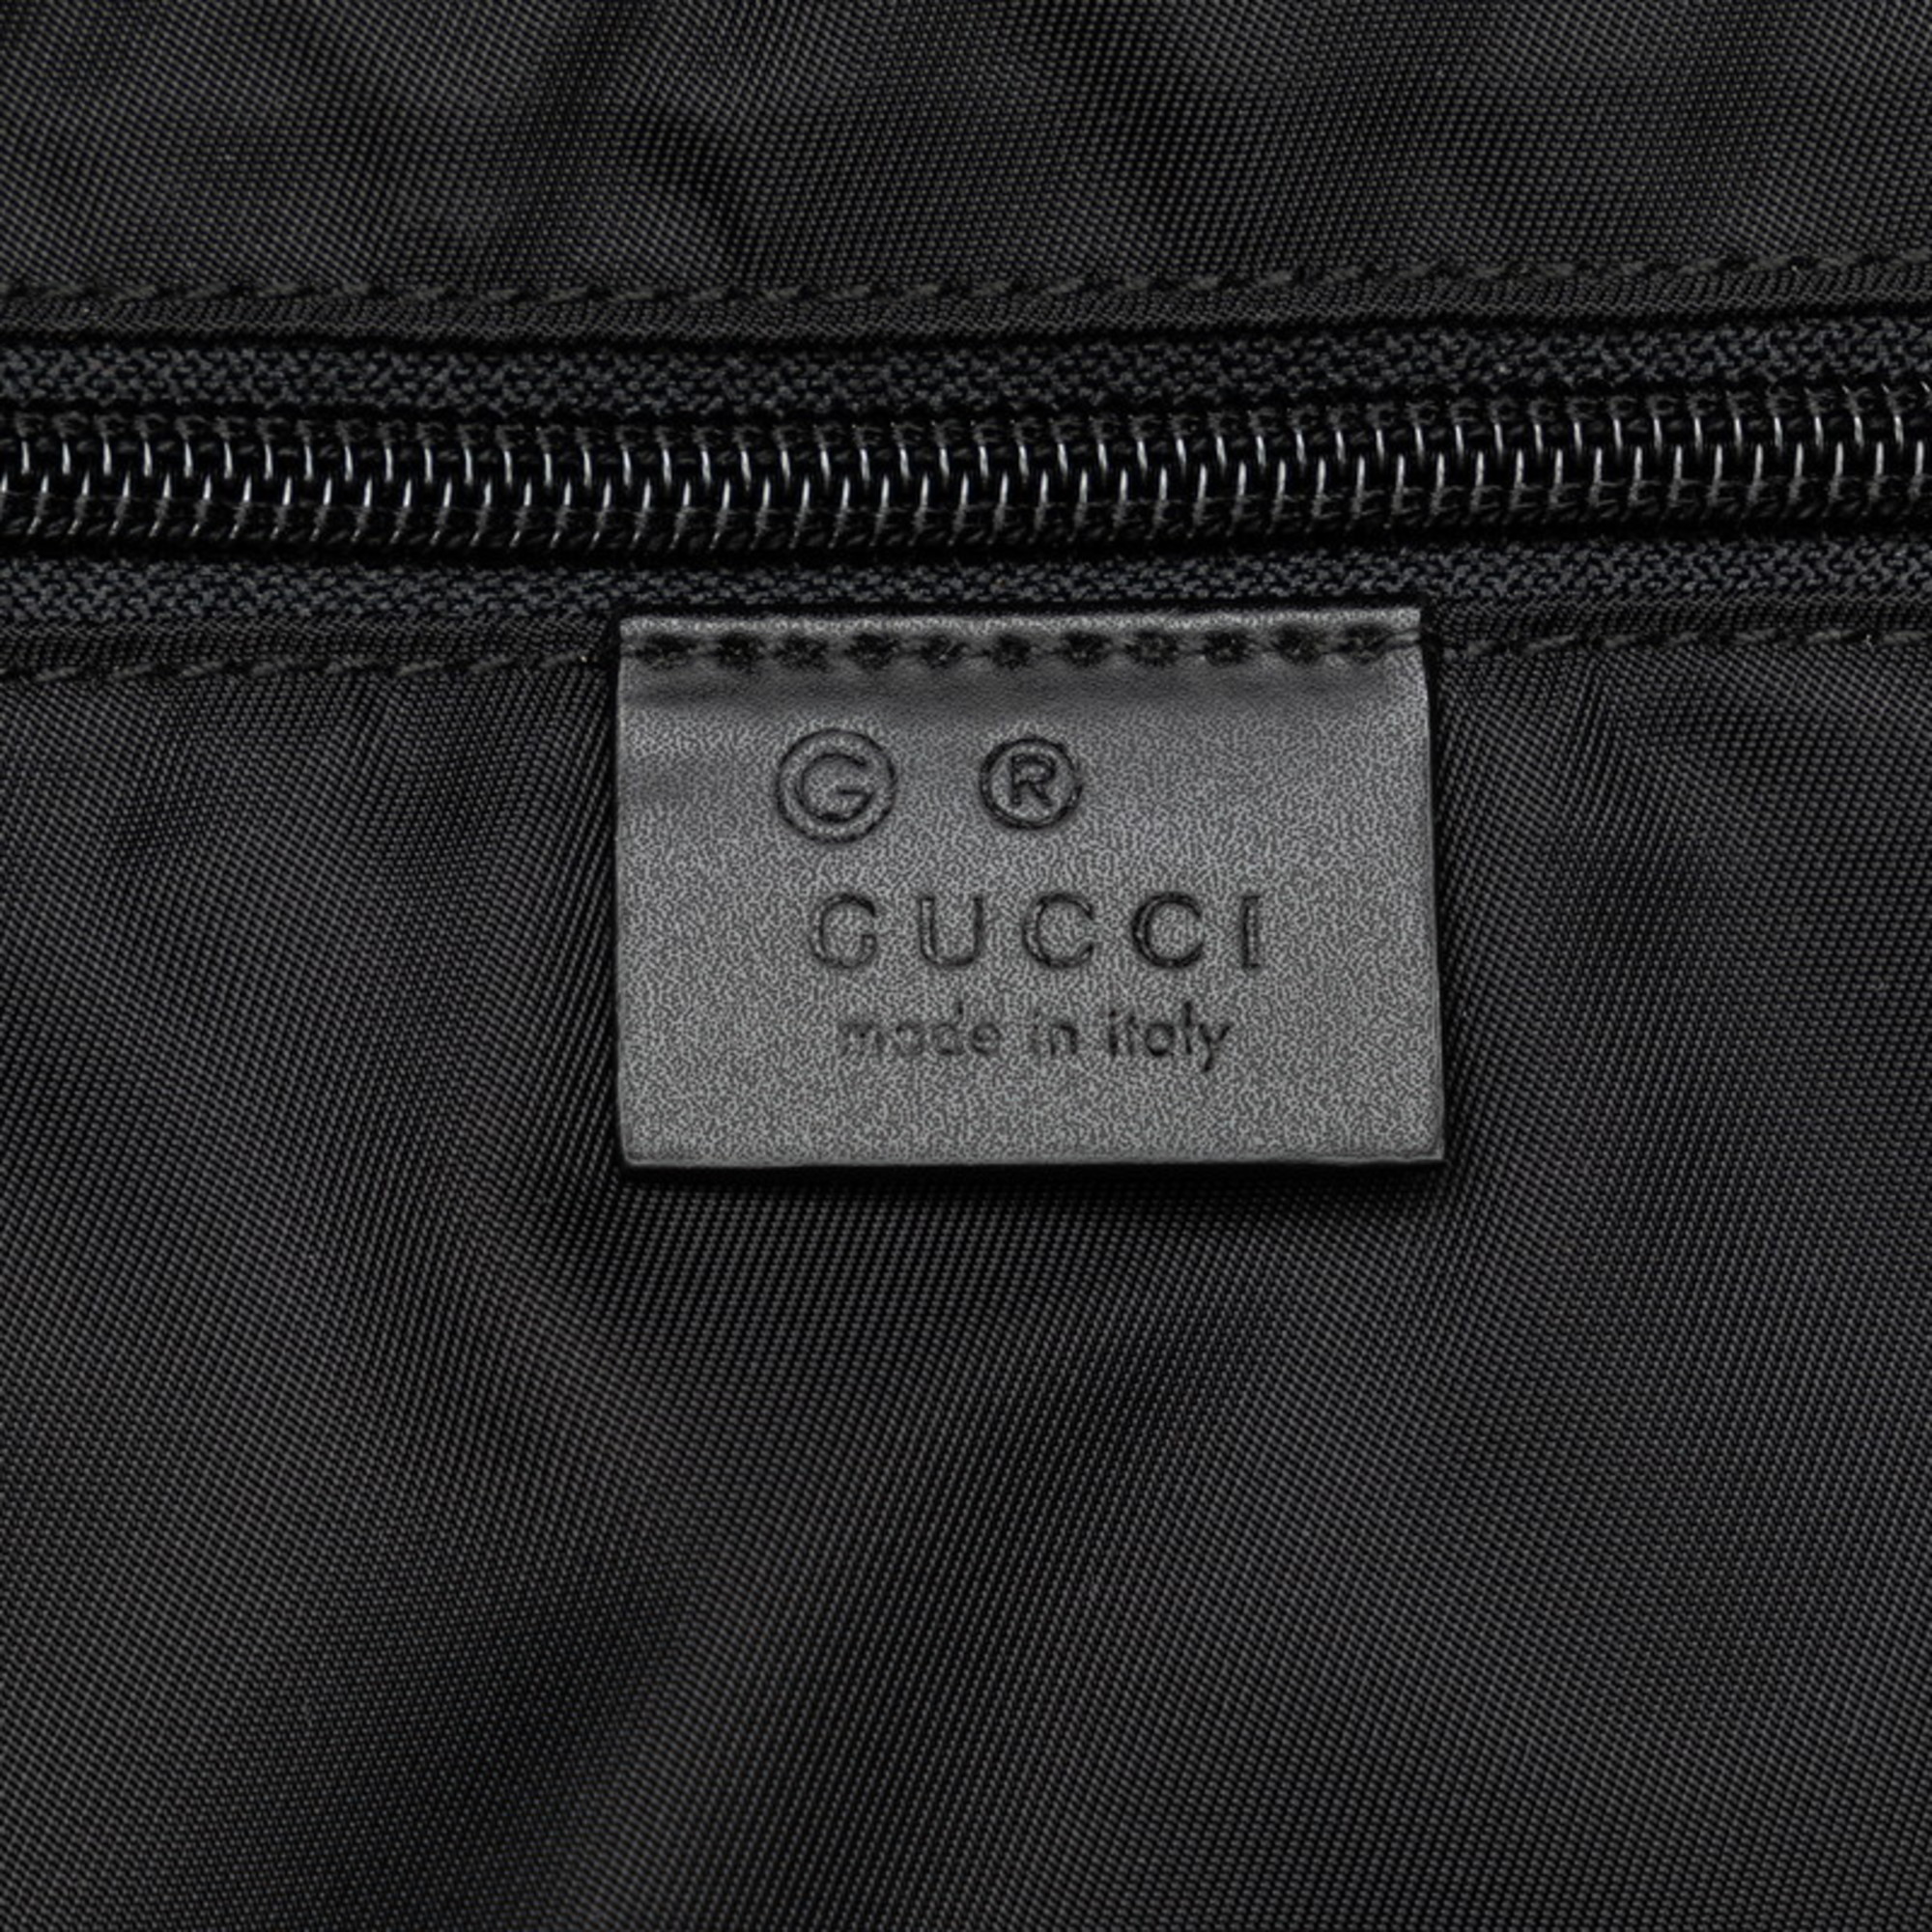 Gucci Sherry Line Backpack 619748 Black Multicolor Canvas Leather Women's GUCCI